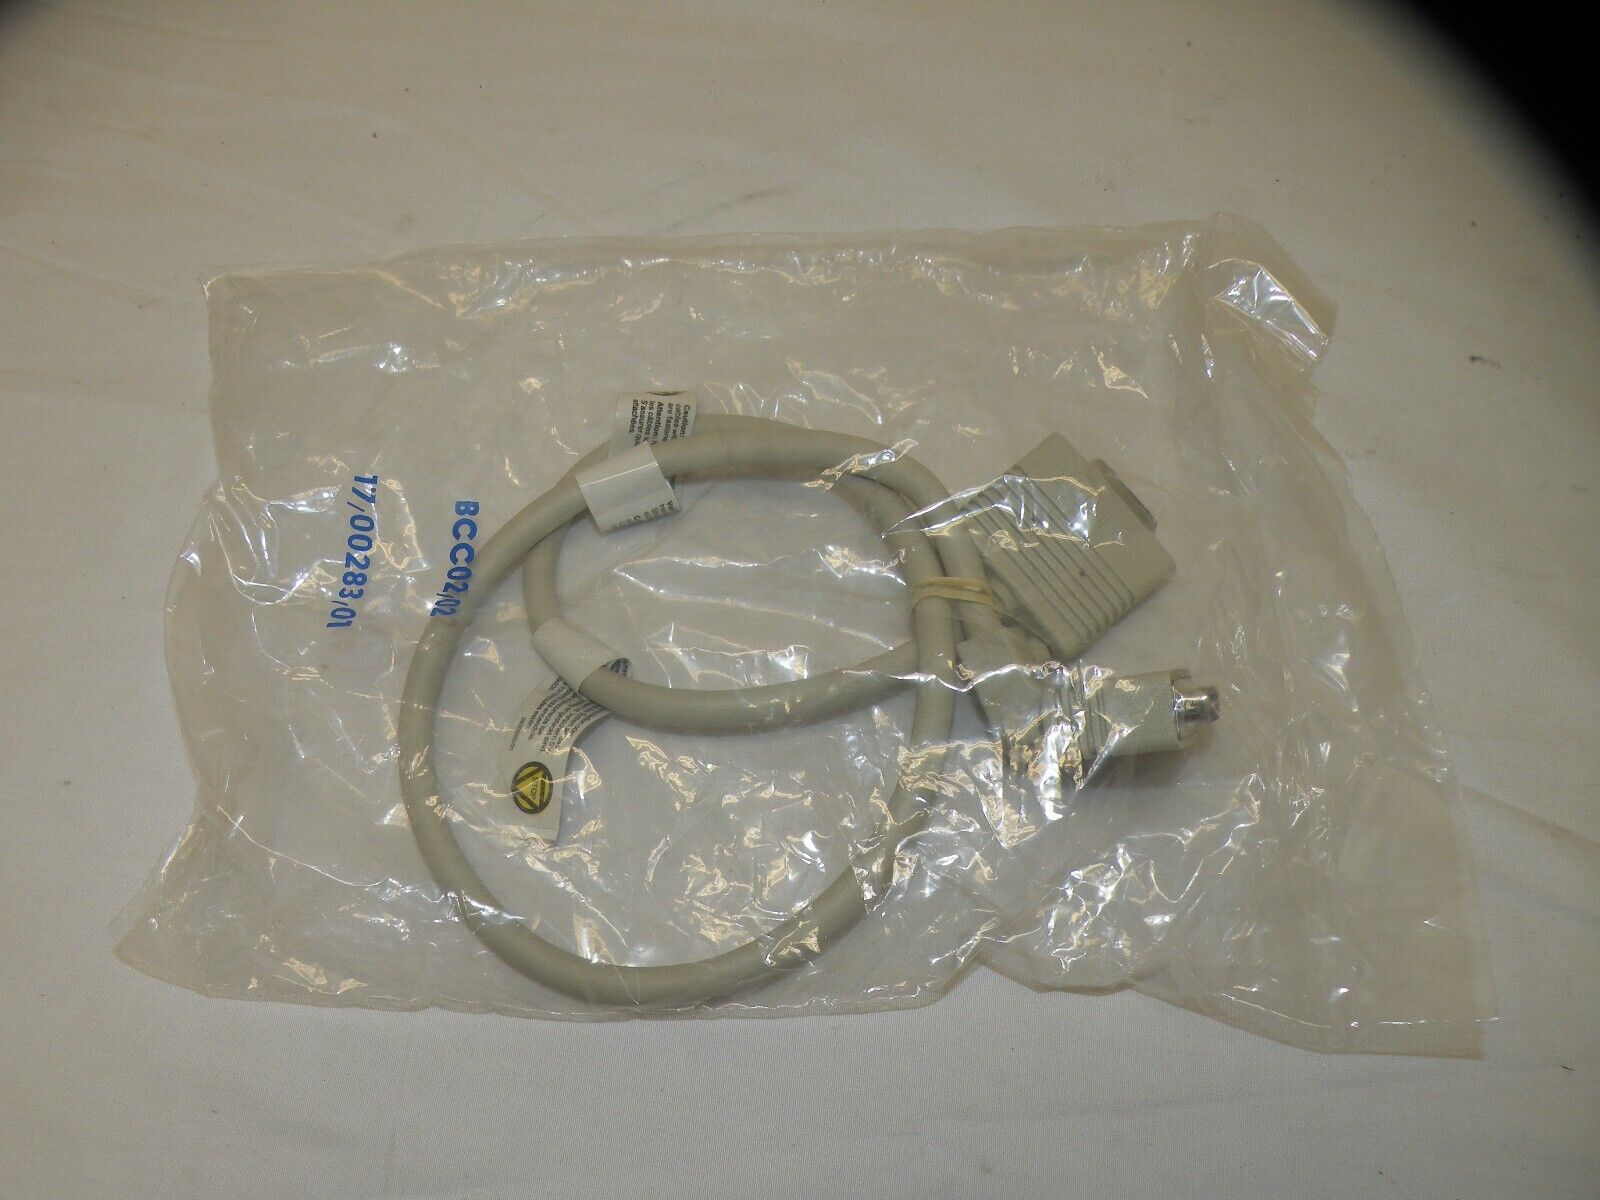 NEW IN BAG DEC BCC02-02 2FT 15 PIN TO 15 PIN VIDEO CABLE FOR VR201 DEC MONITOR